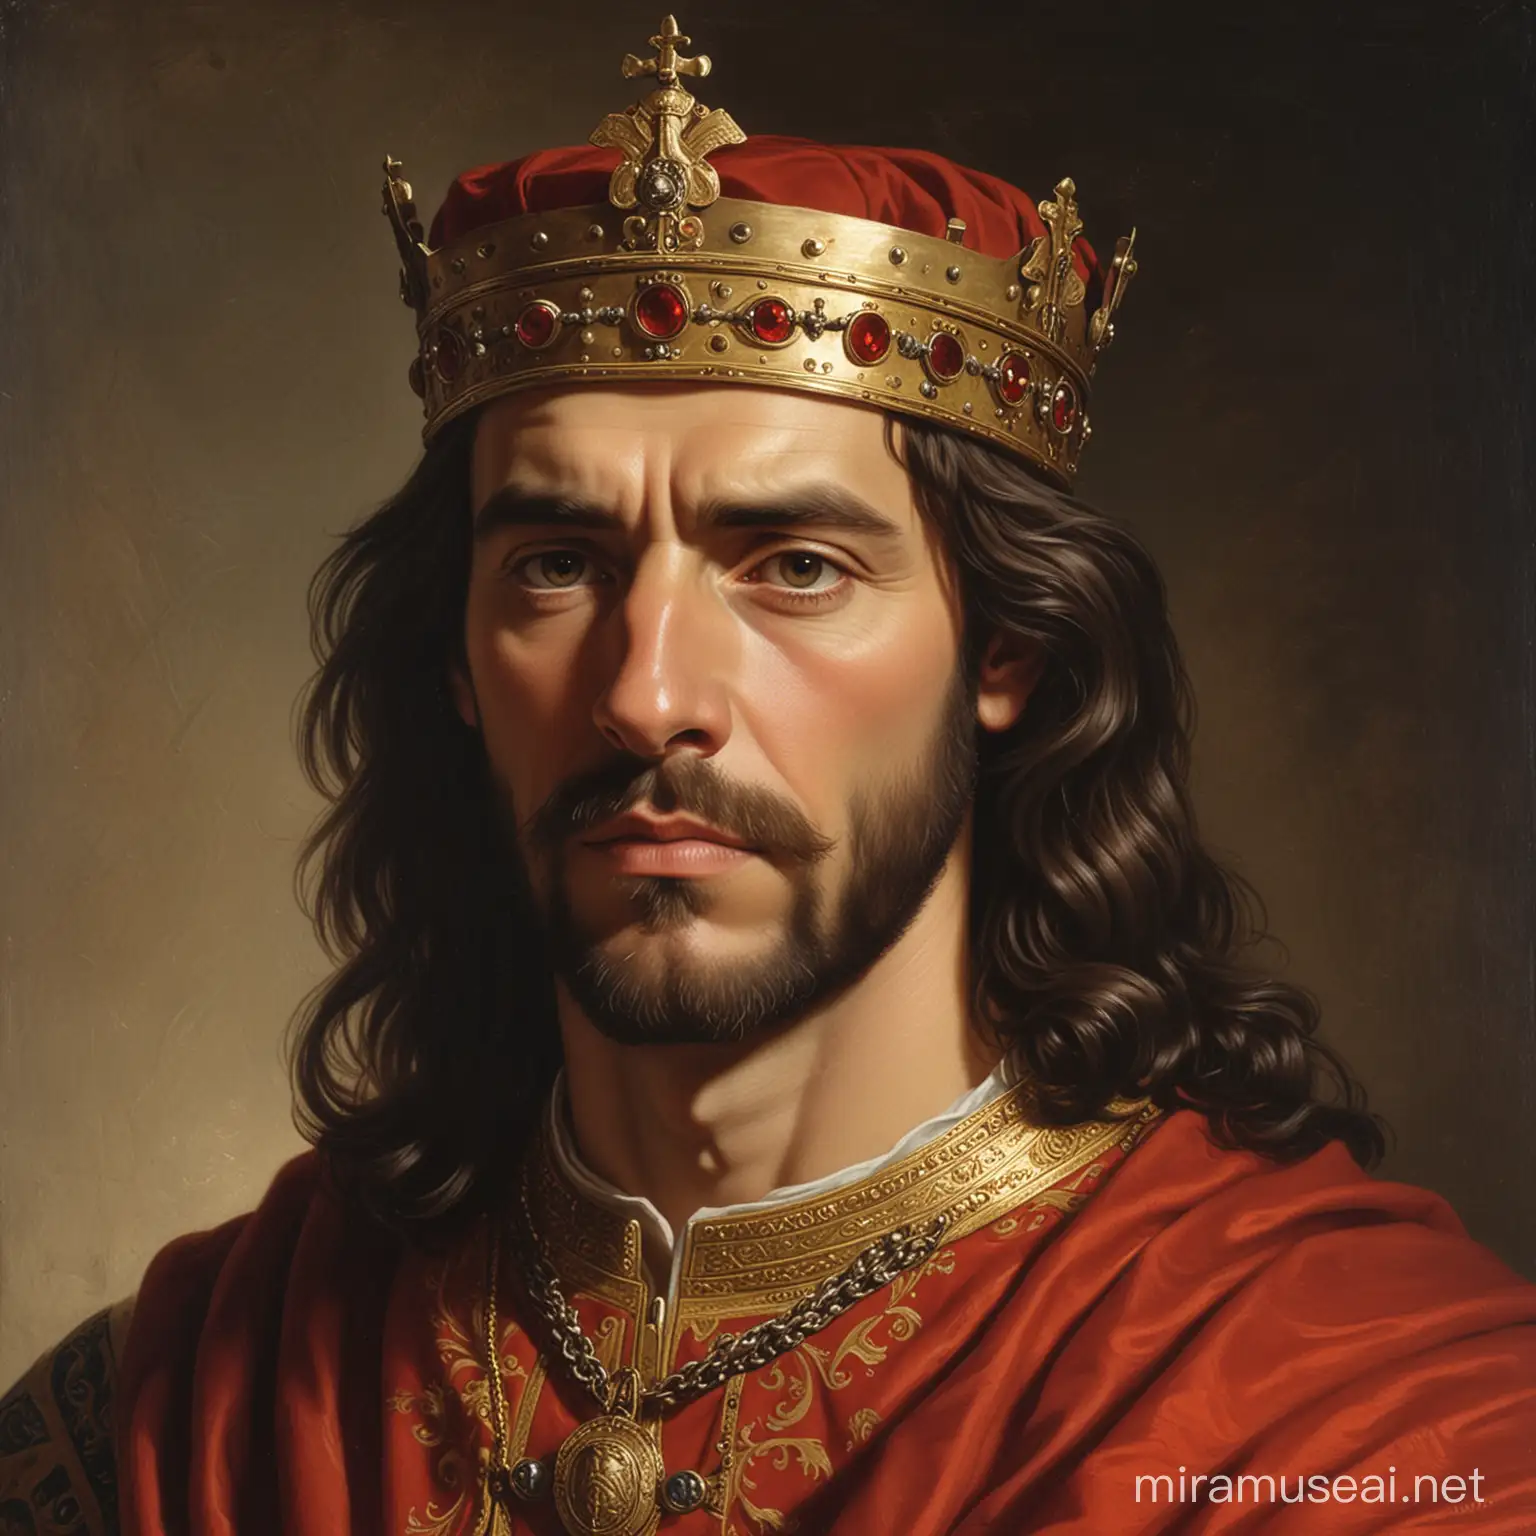 Regal Portrait of the Spanish King in the 12th Century by John Waterhouse